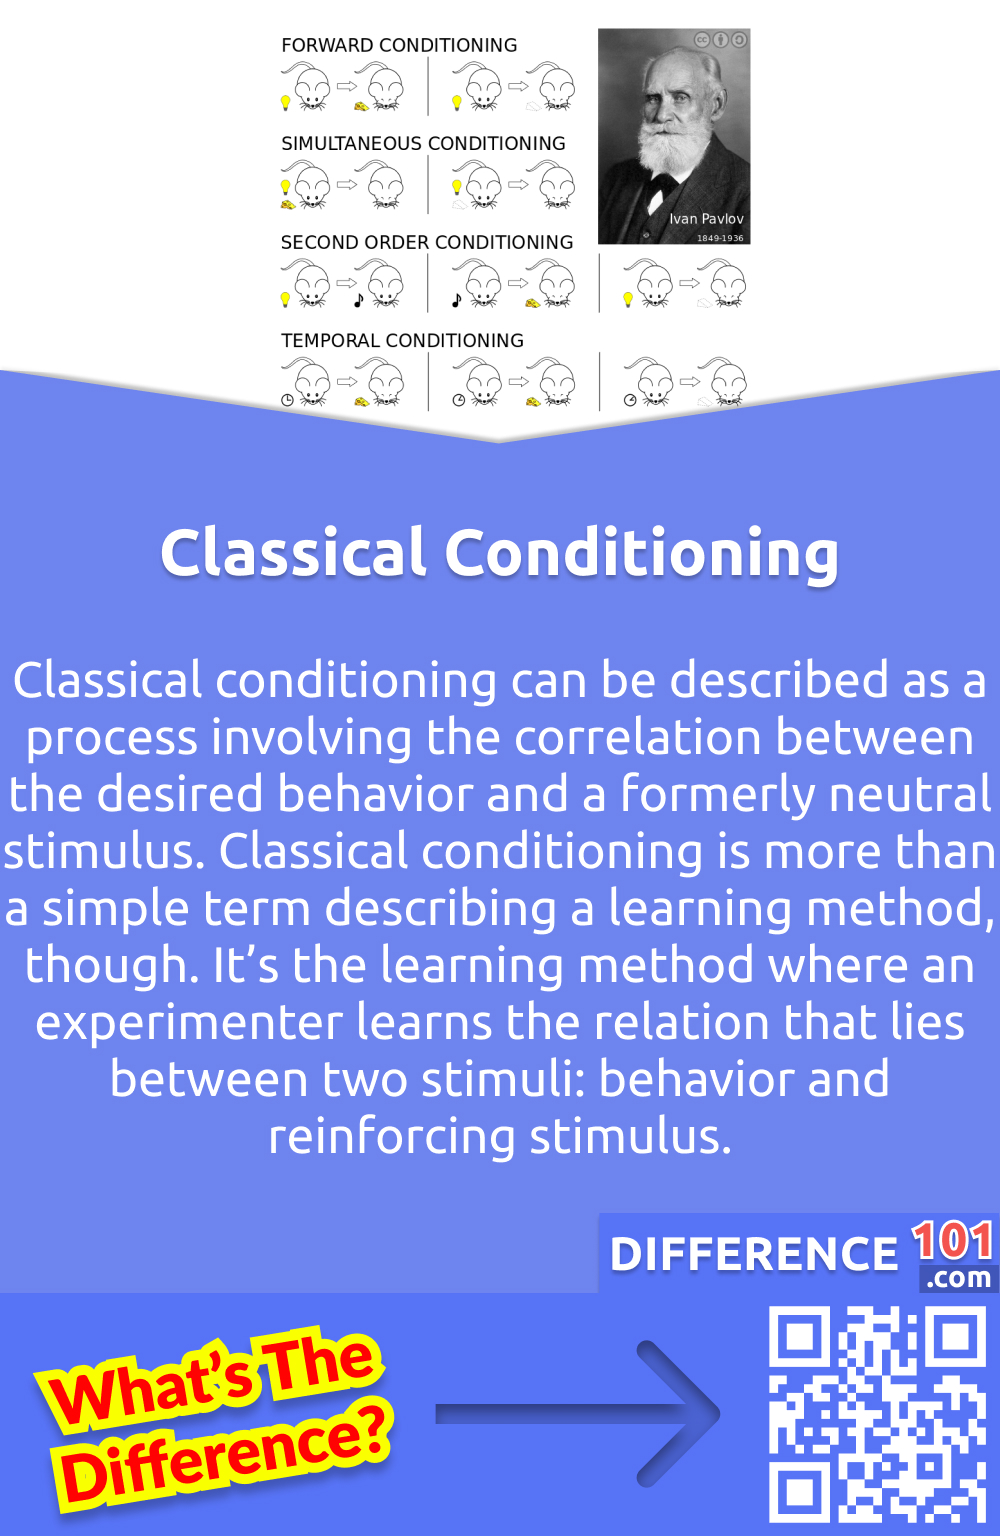 What Is Classical Conditioning? Classical conditioning can be described as a process involving the correlation between the desired behavior and a formerly neutral stimulus. Classical conditioning is more than a simple term describing a learning method, though. It’s the learning method where an experimenter learns the relation that lies between two stimuli: behavior and reinforcing stimulus.